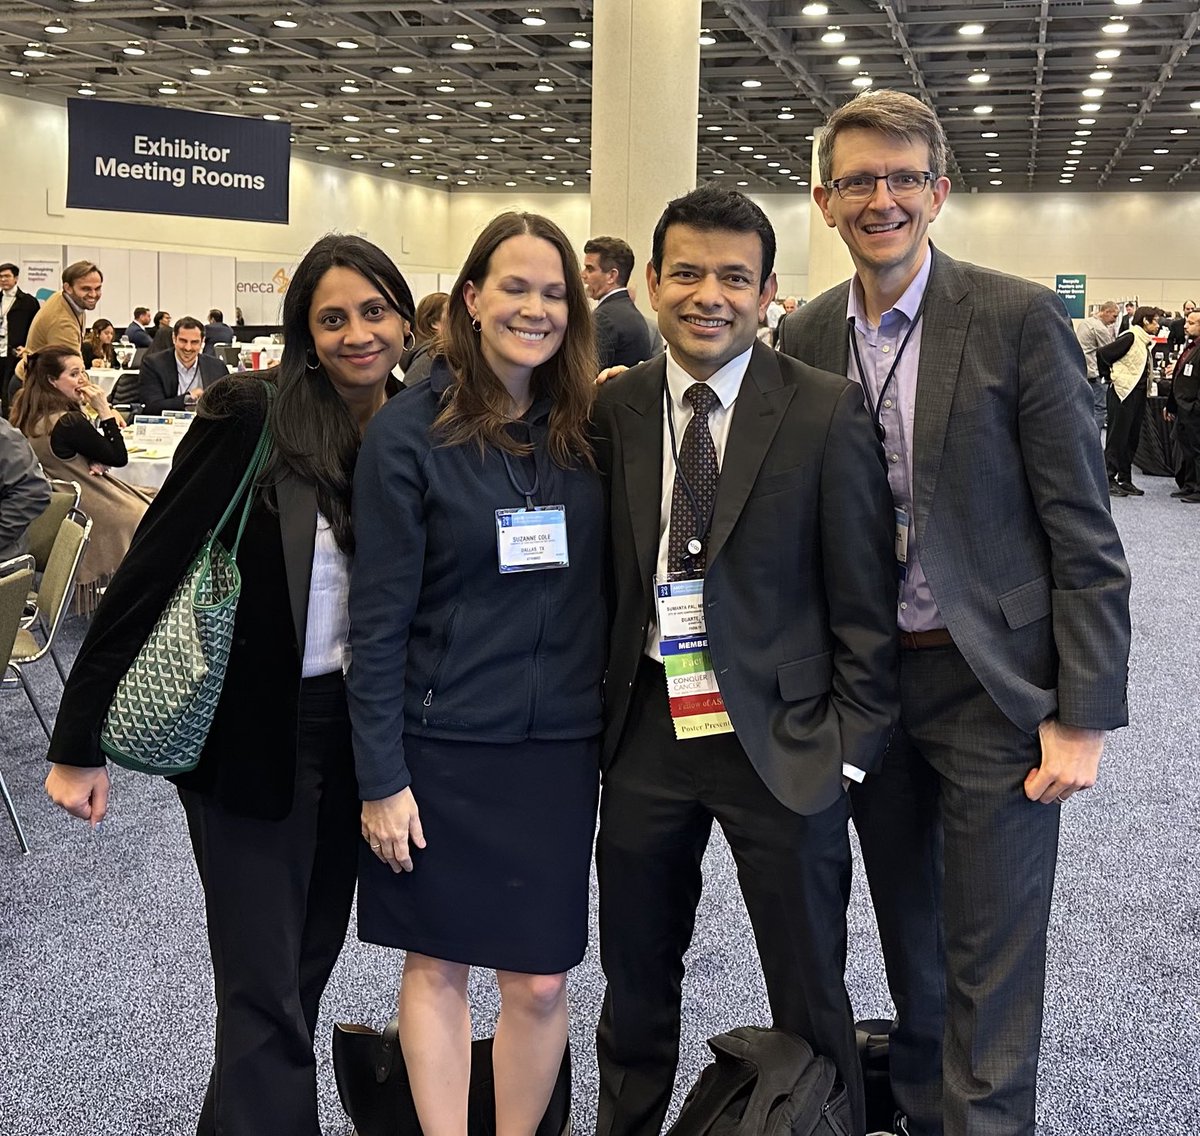 Ran into ⁦⁦@montypal⁩ for a larger reunion! ⁦@ASCO⁩ LDP was a great experience and great to catch up! ⁦@ndenduluri1⁩ ⁦@SuzanneColeMD⁩